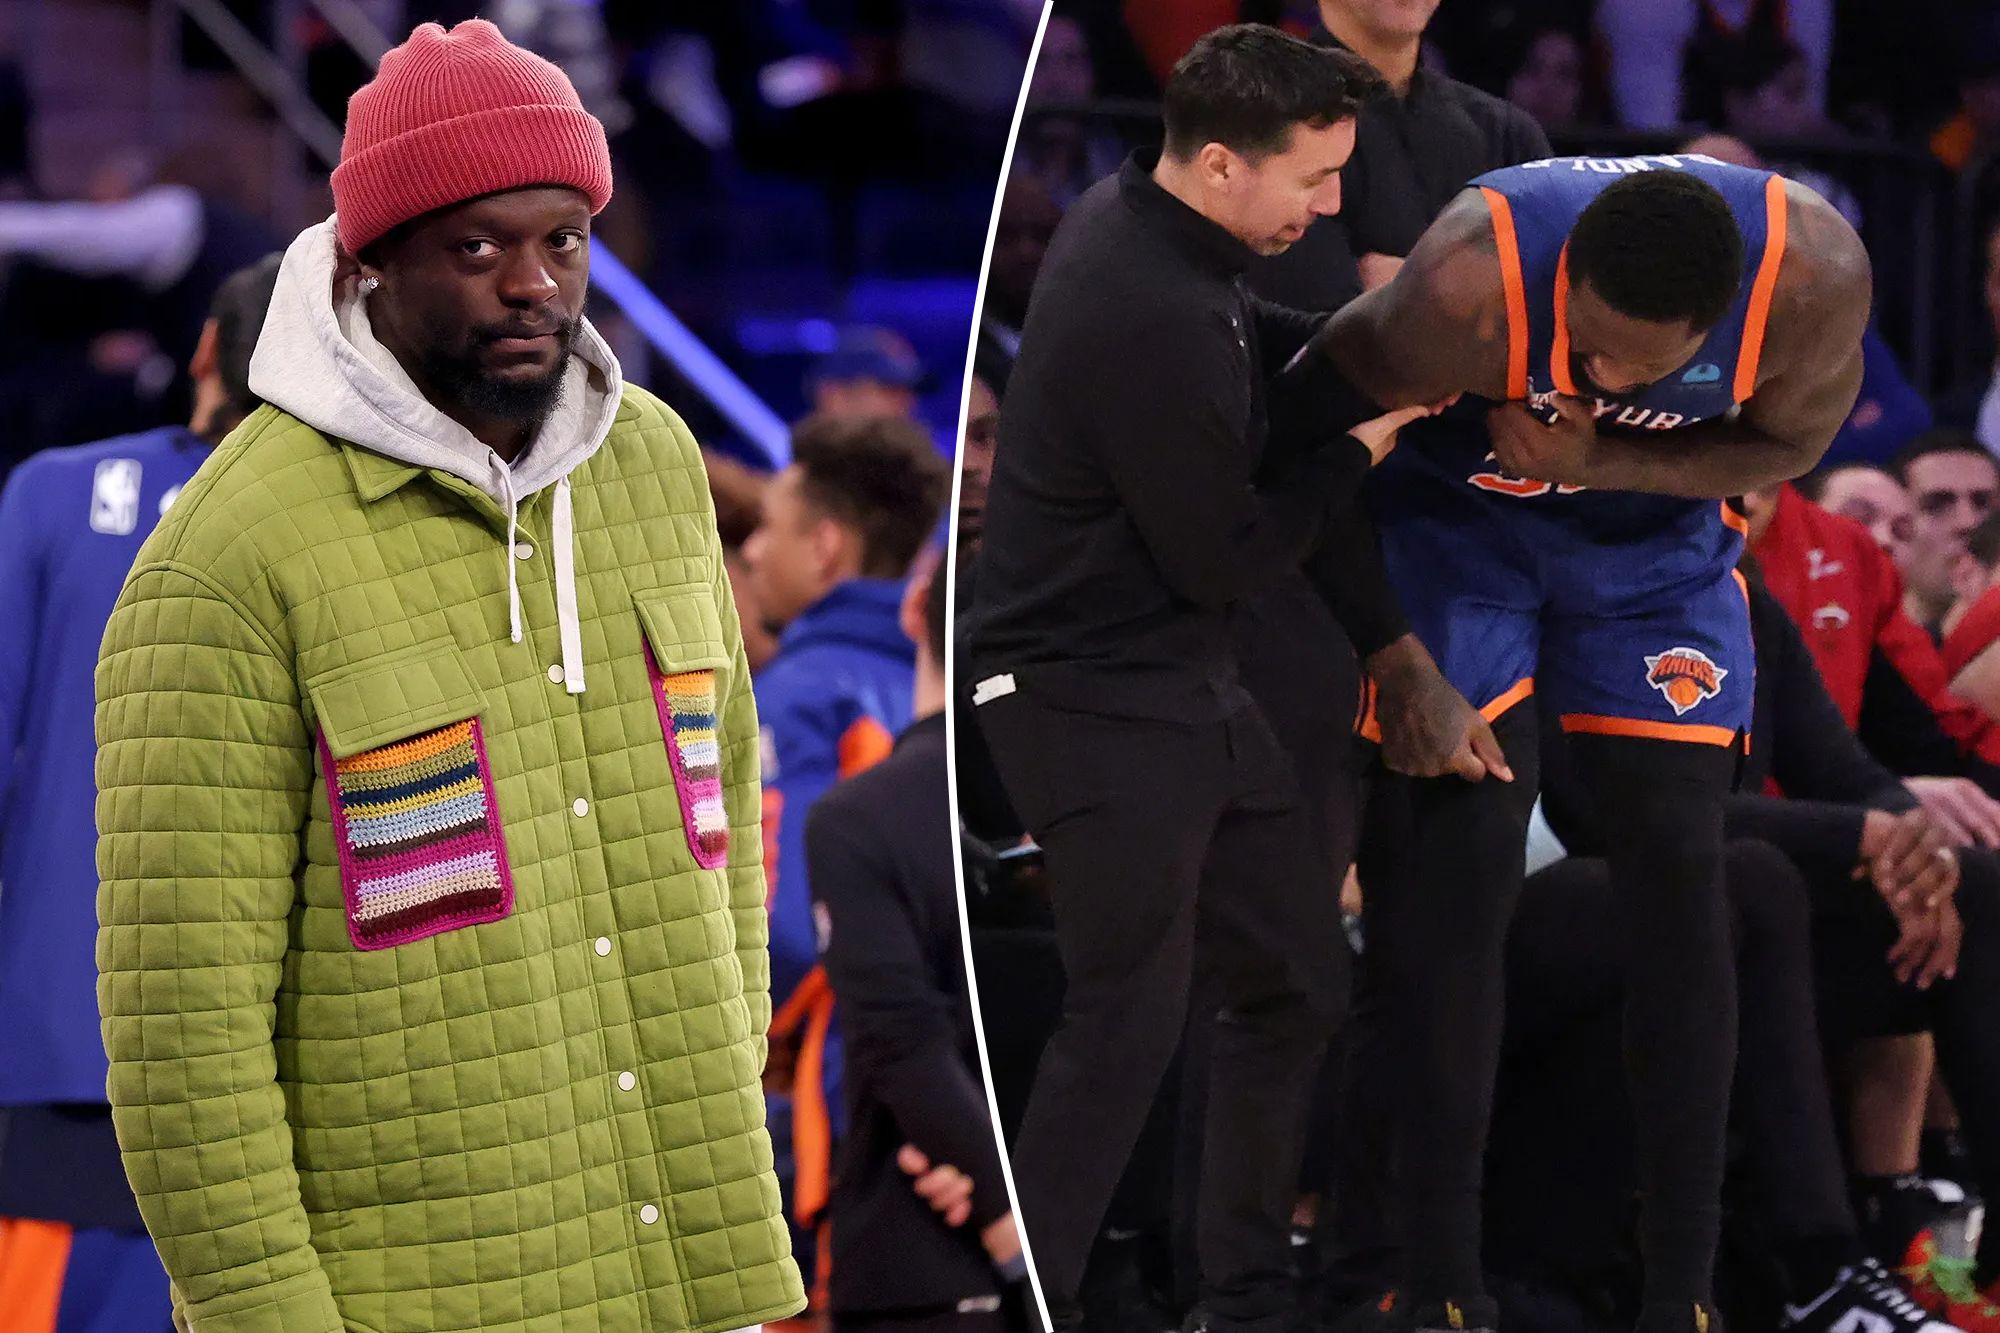 The Knicks' Julius Randle in street clothes and after injuring his shoulder on Jan. 27.